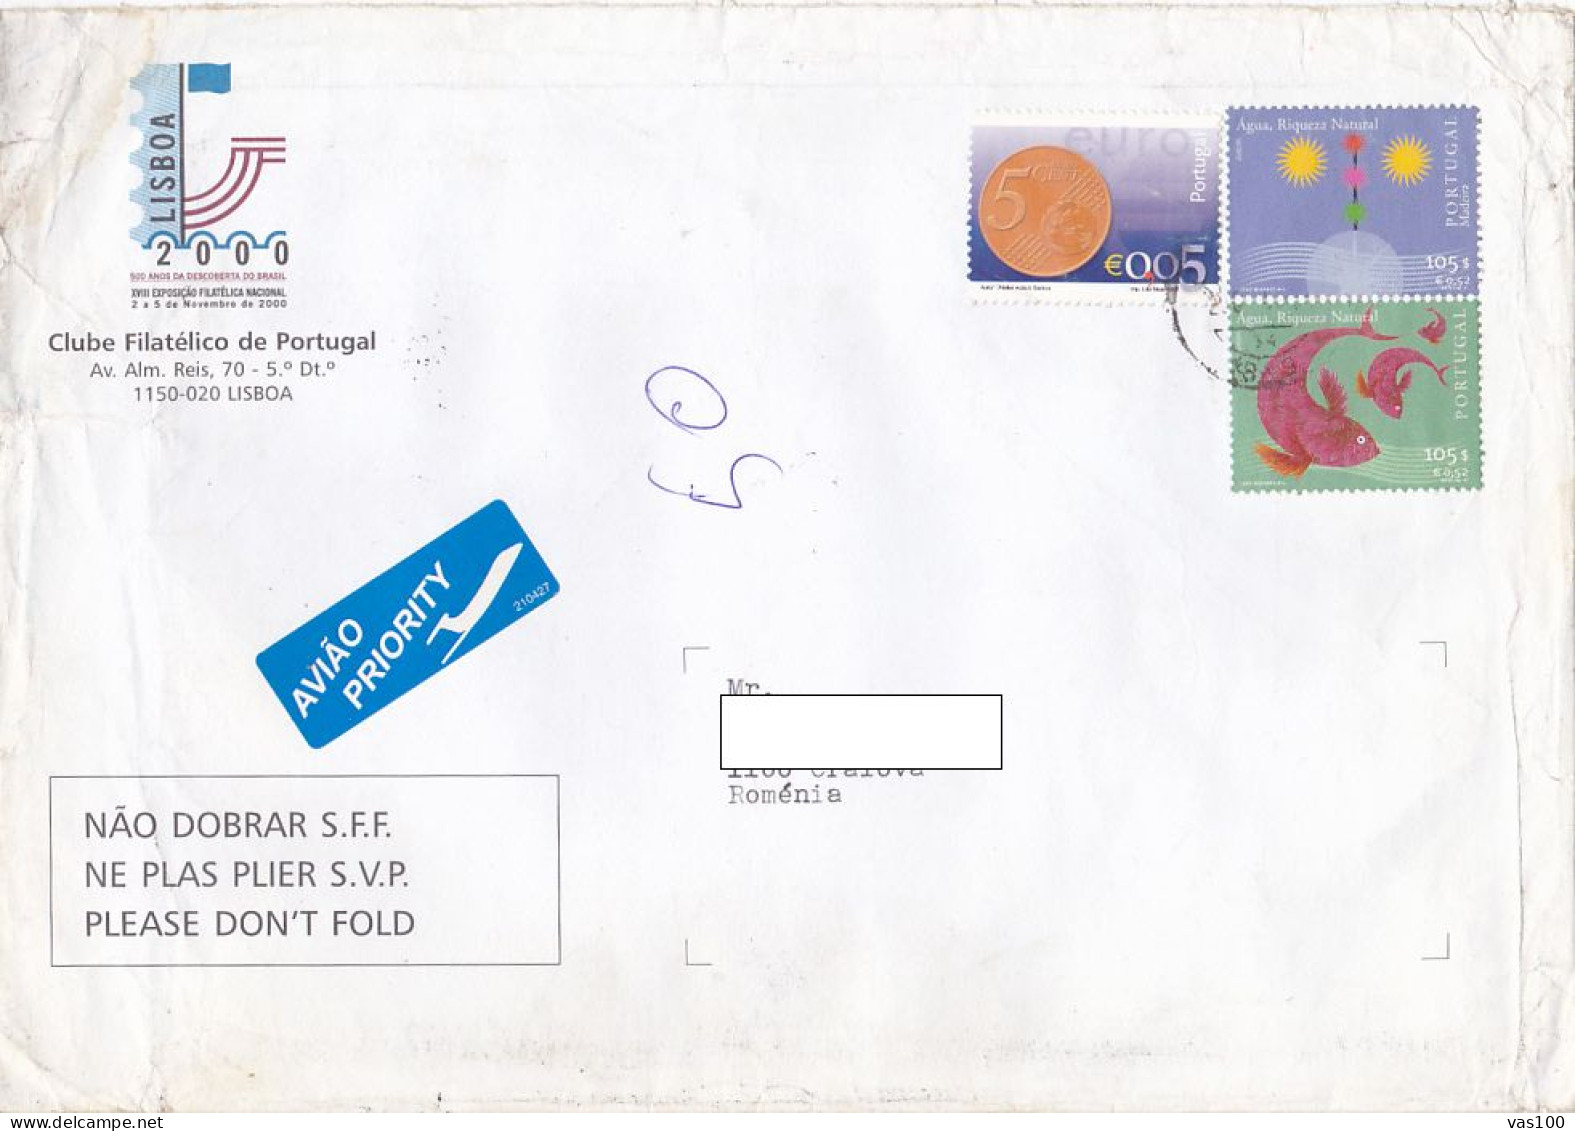 EURO CURRENCY, COIN, SAVE WATER, FISH, STAMPS ON COVER, 2002, PORTUGAL - Briefe U. Dokumente